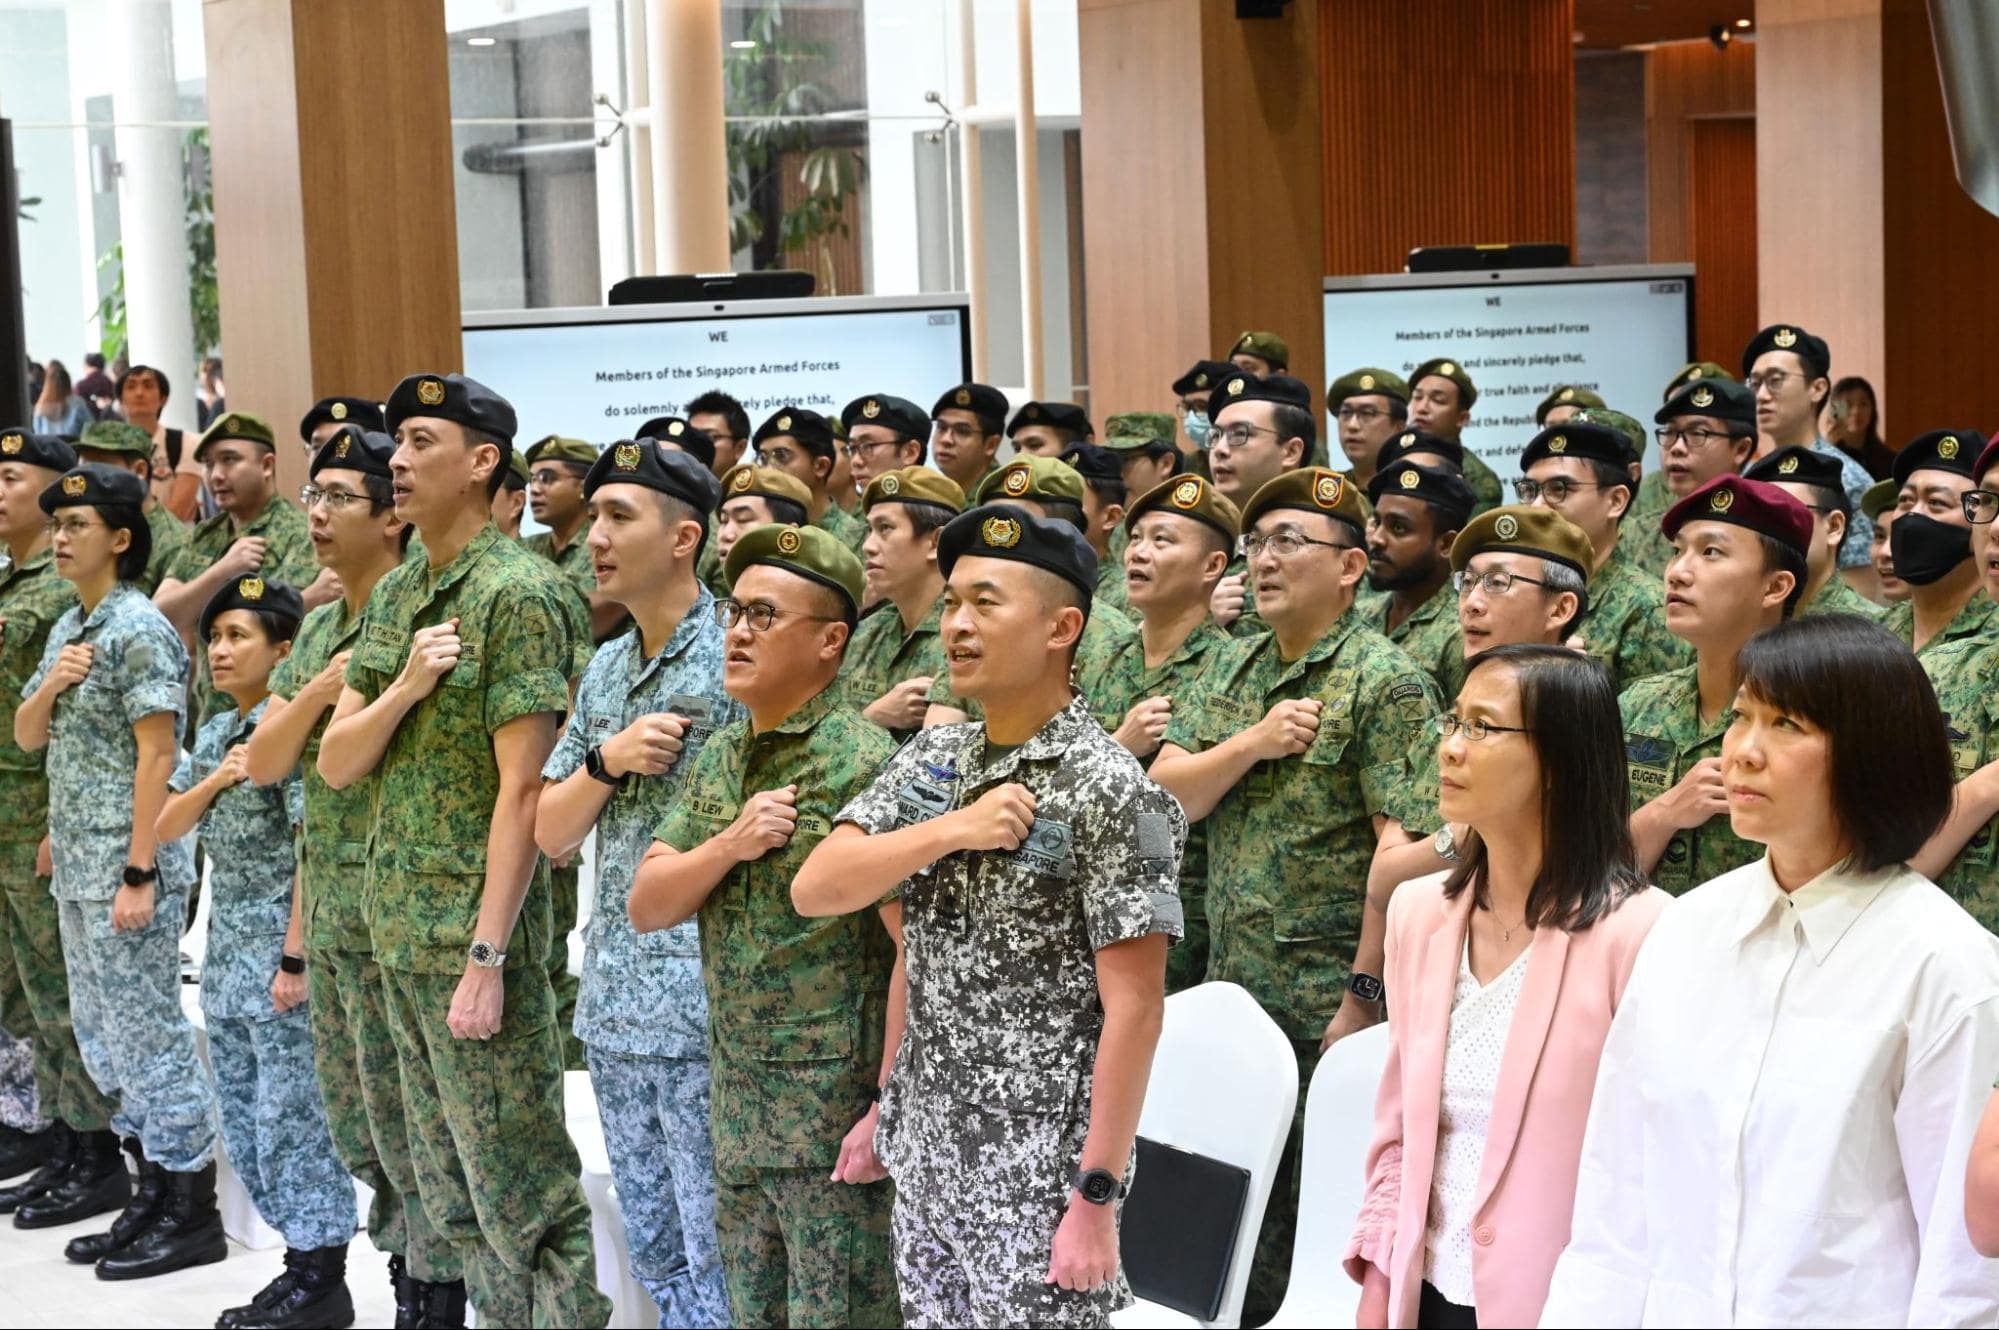 Why Singaporean men look forward to in-camp training - NCS SAF rededication day